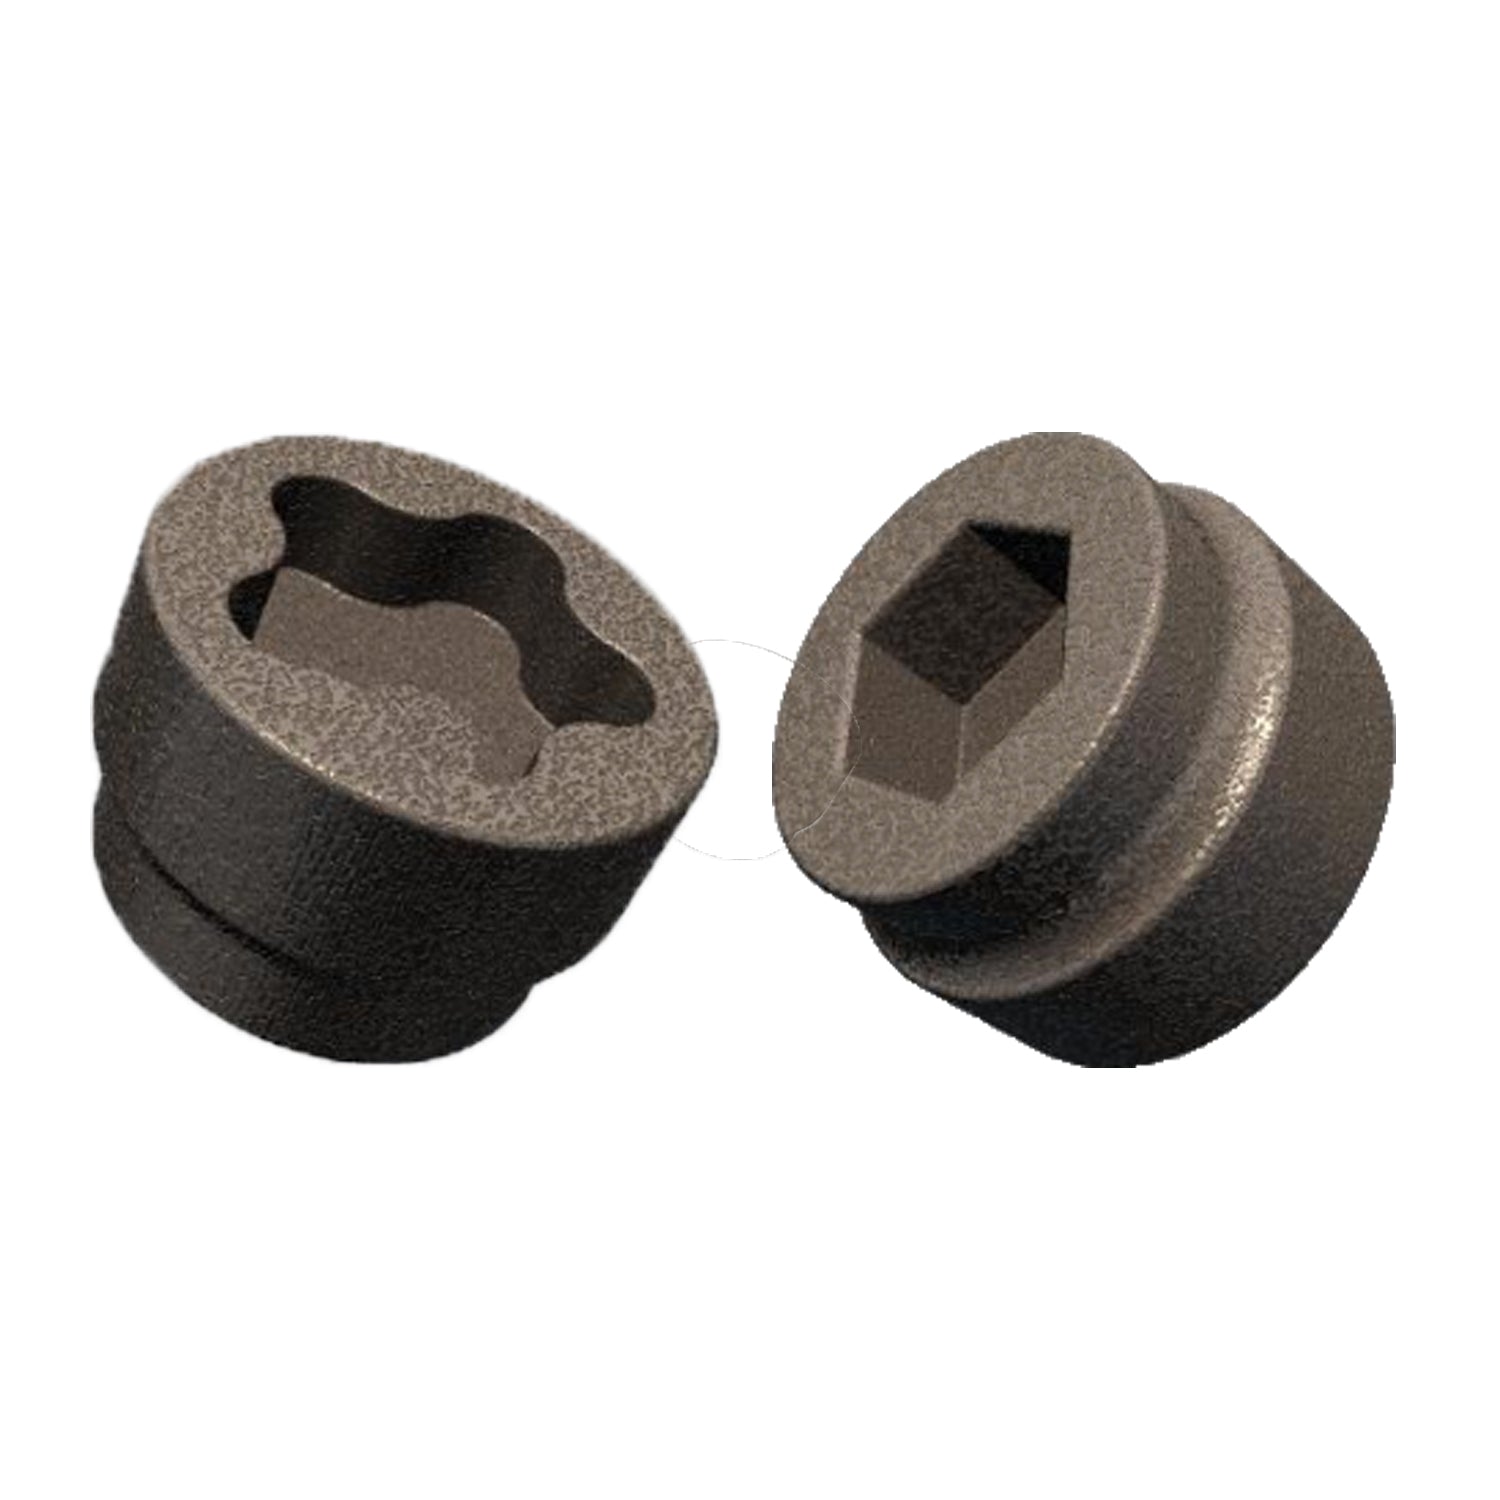 License Plate Removal Socket Adapter Tool for Tesla